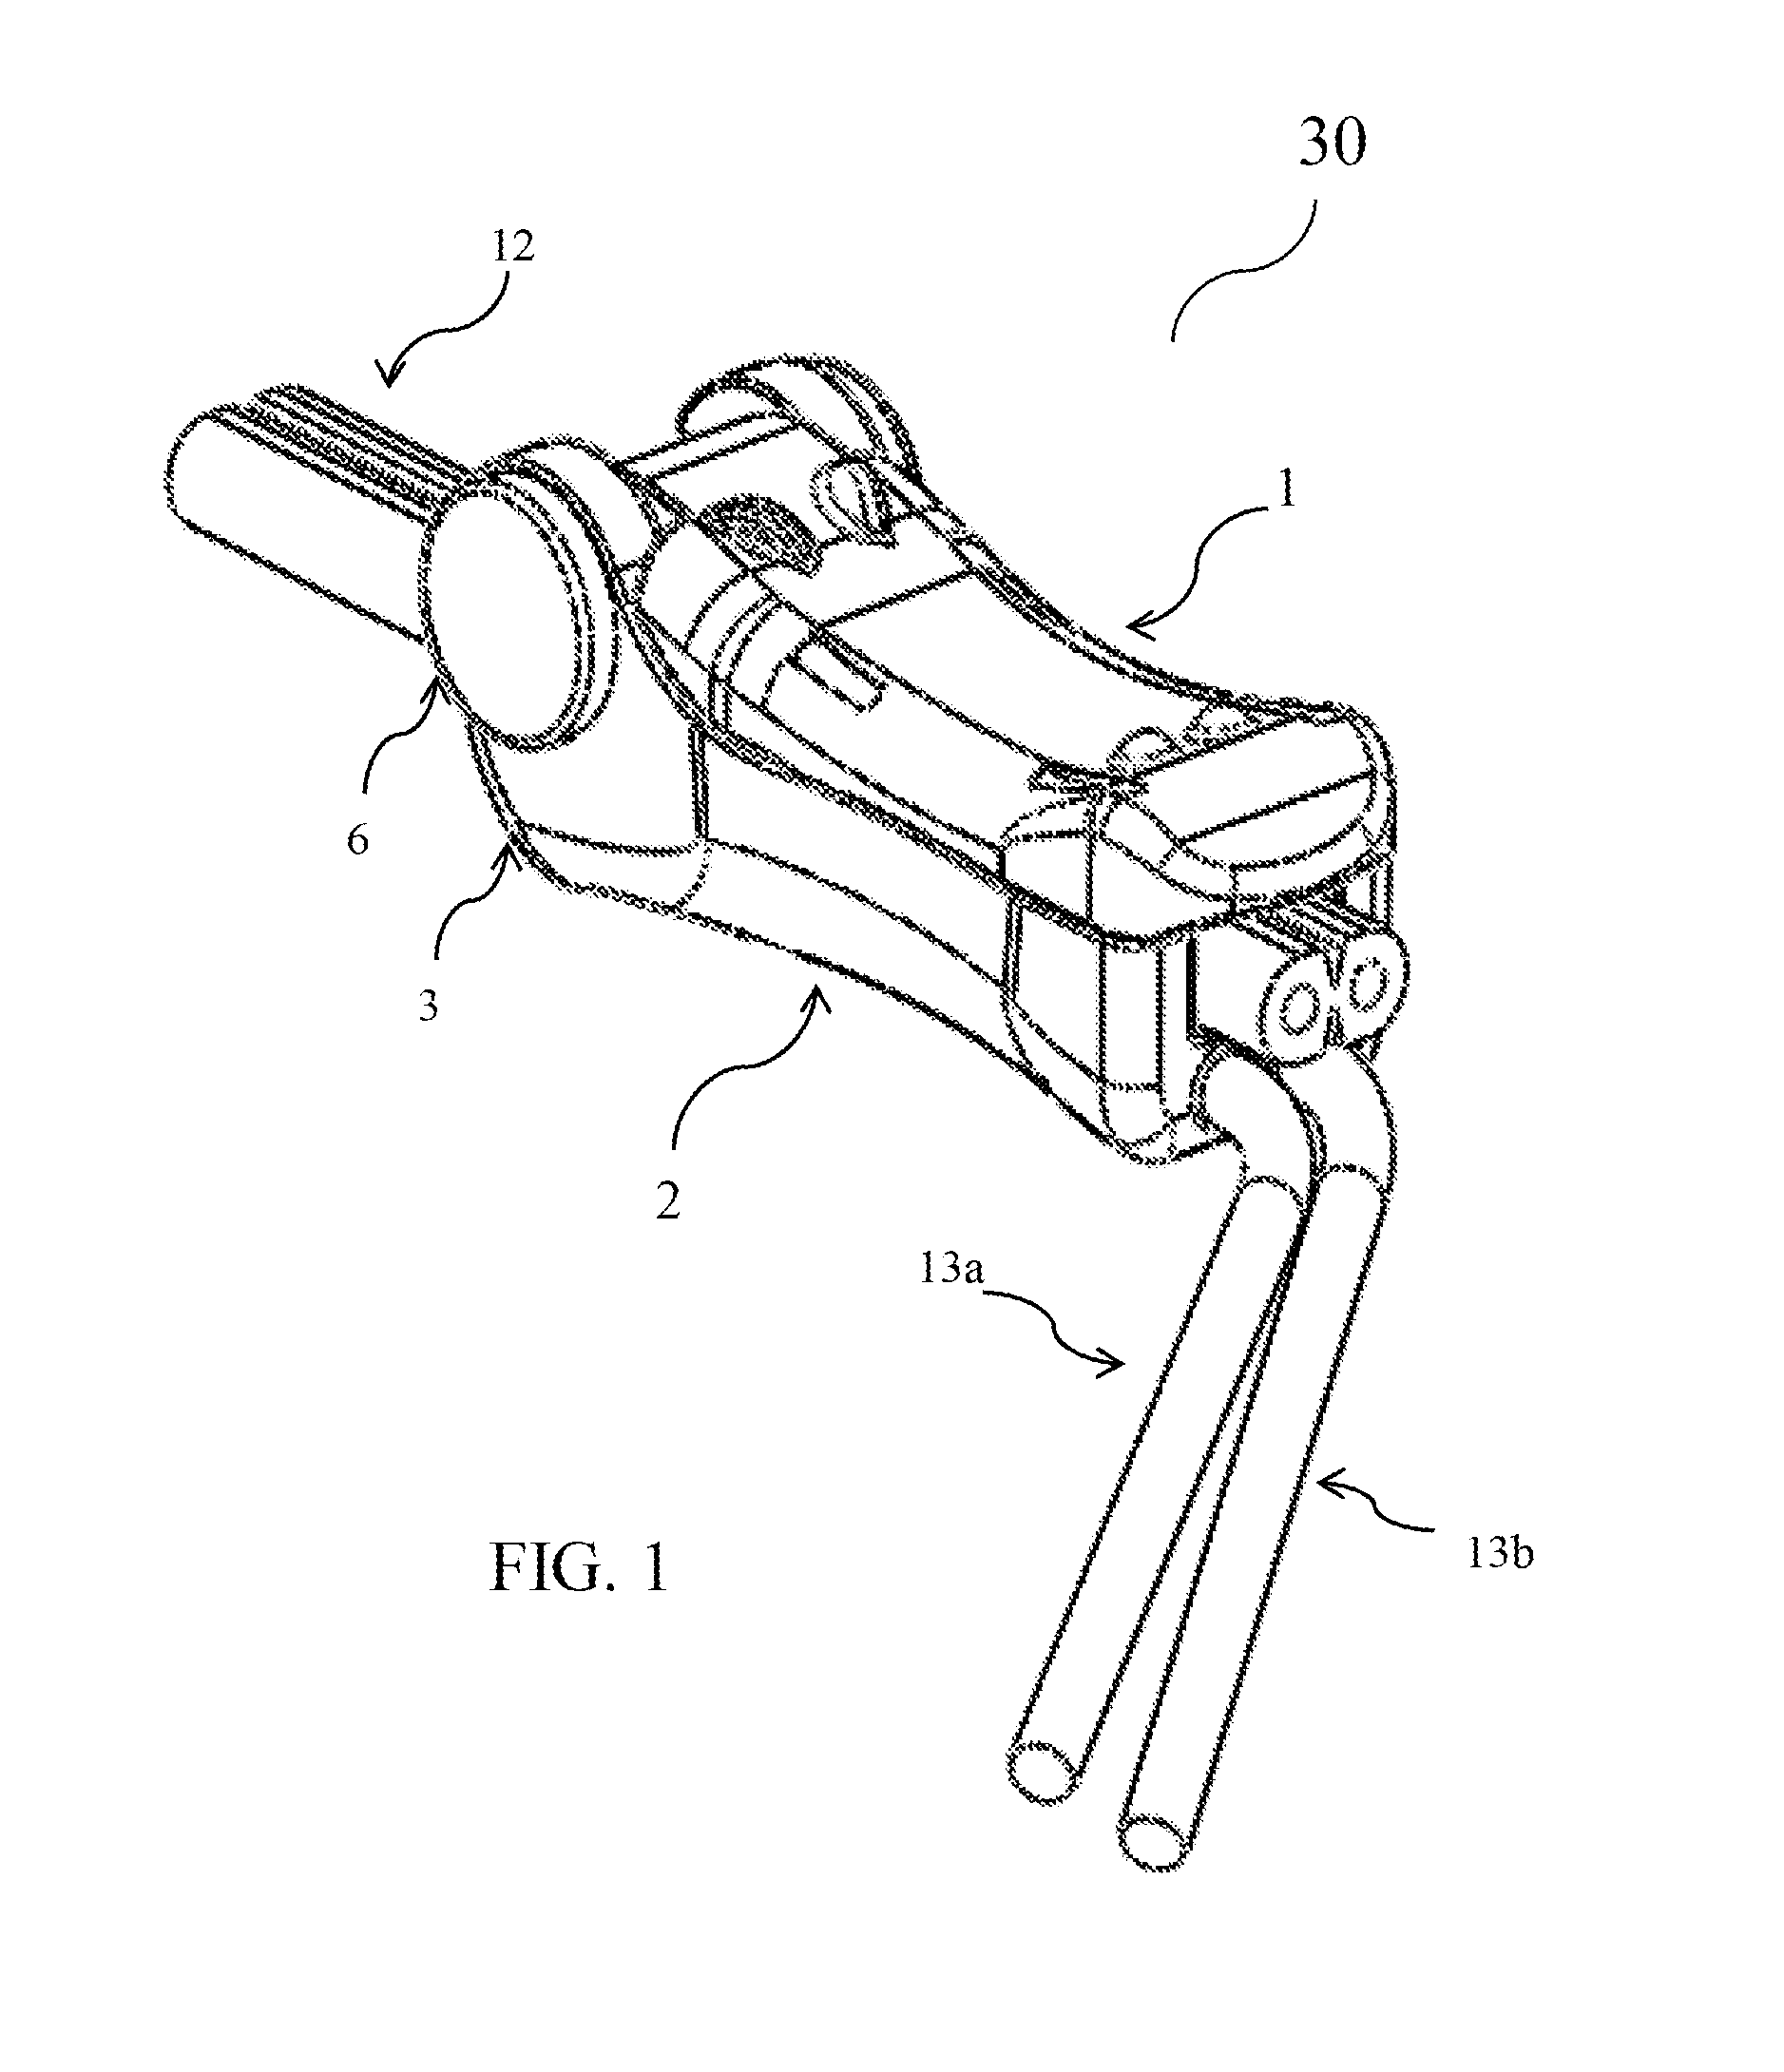 Electrical connector assembly with detachable pivot shaft and pivot hub with insert